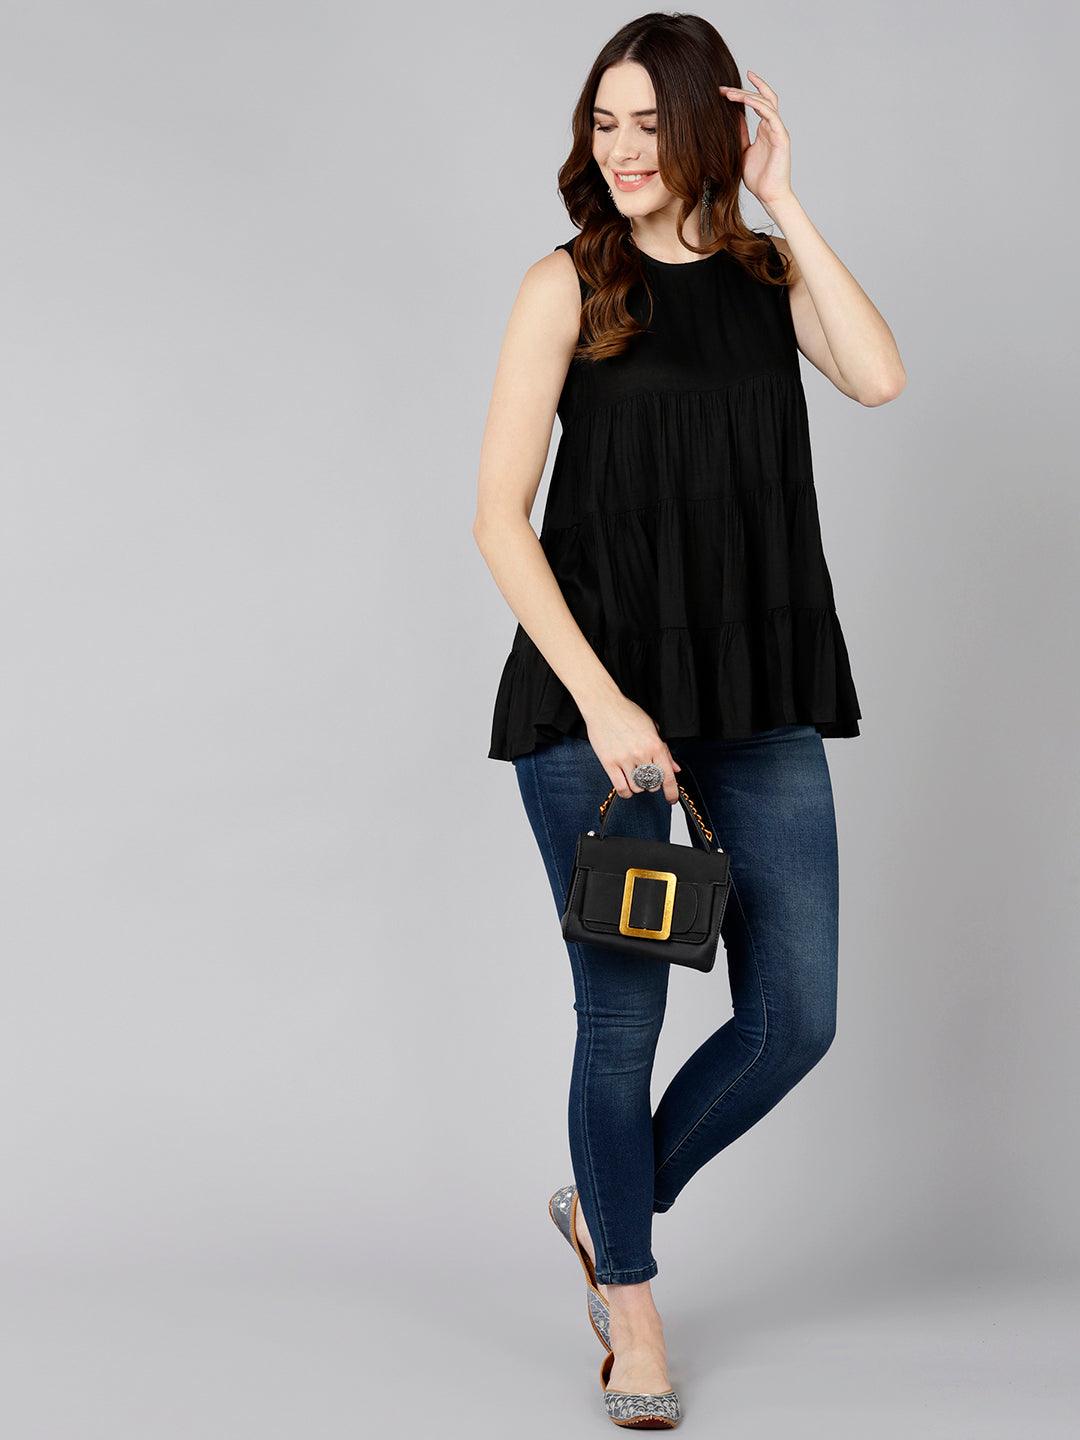 Solid Black Tiered Top - Znxclothing